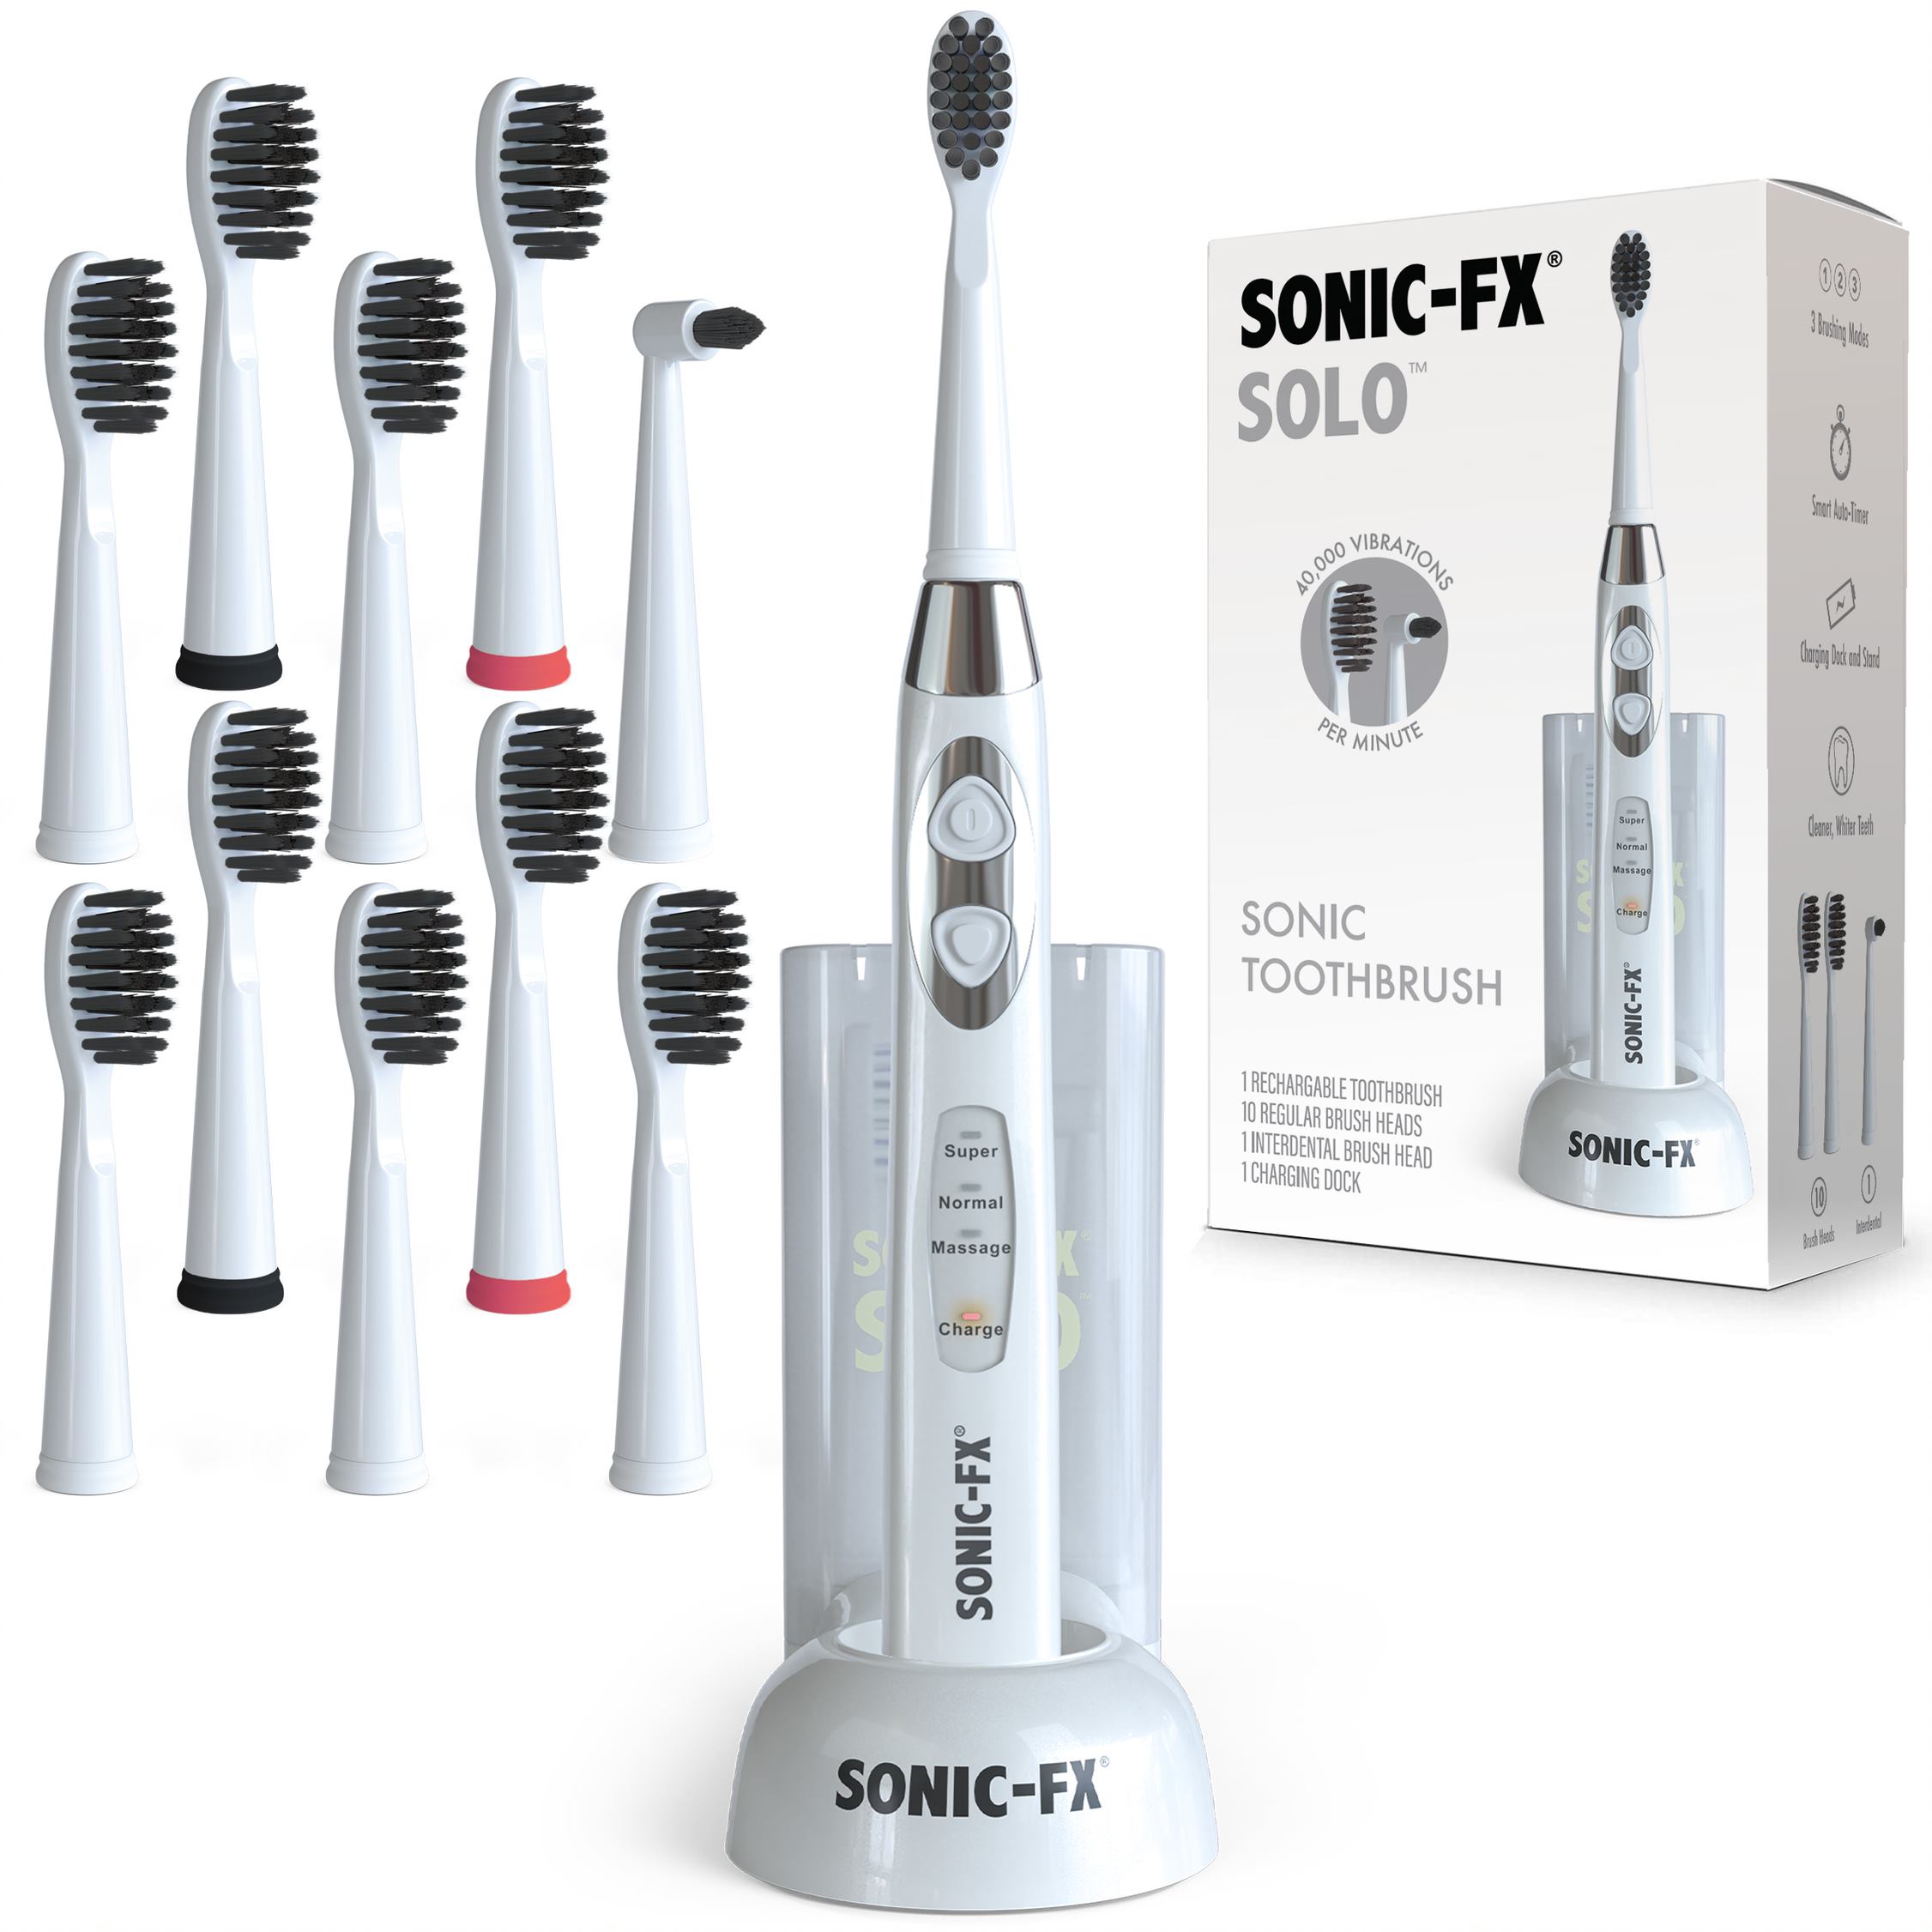 Sonic-FX Solo with 8 Brush Heads in White